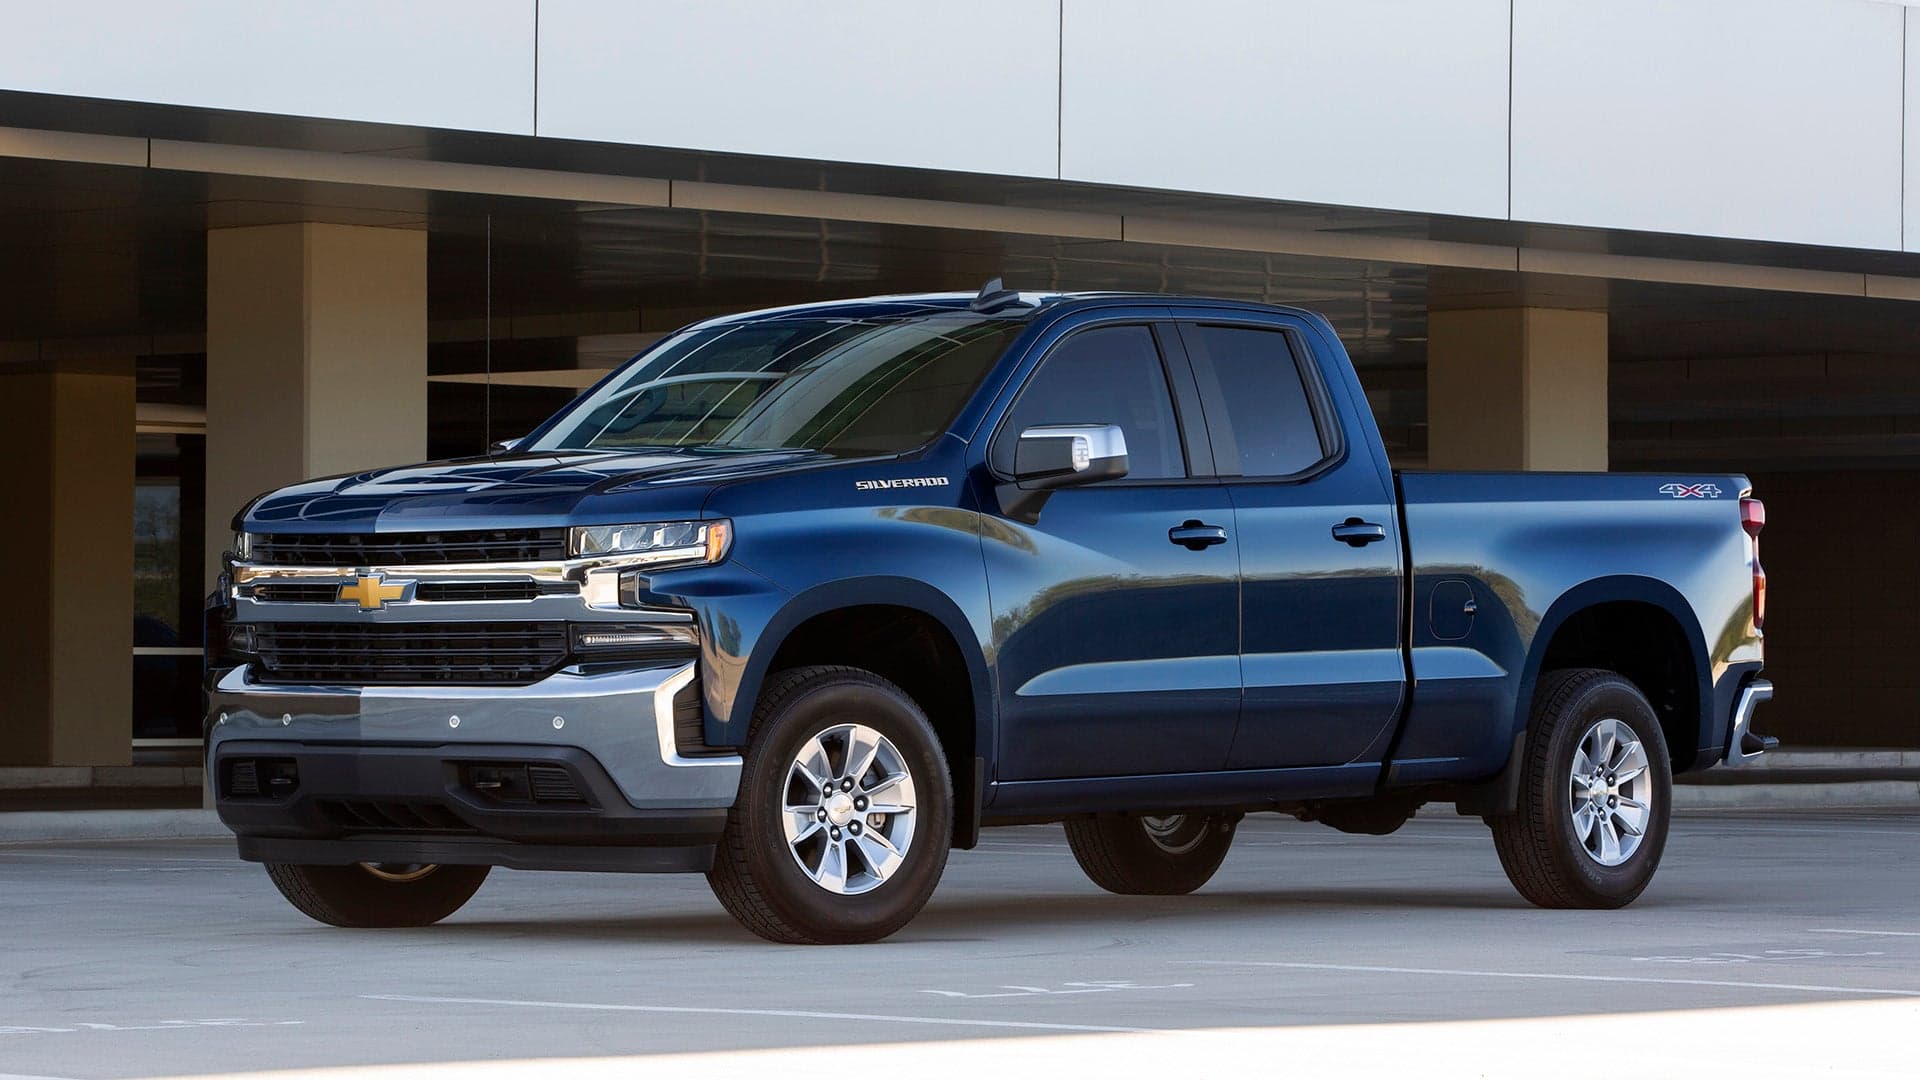 GM on Chevy Silverado 4-Cylinder Fuel Economy: Don’t Look at the EPA Rating